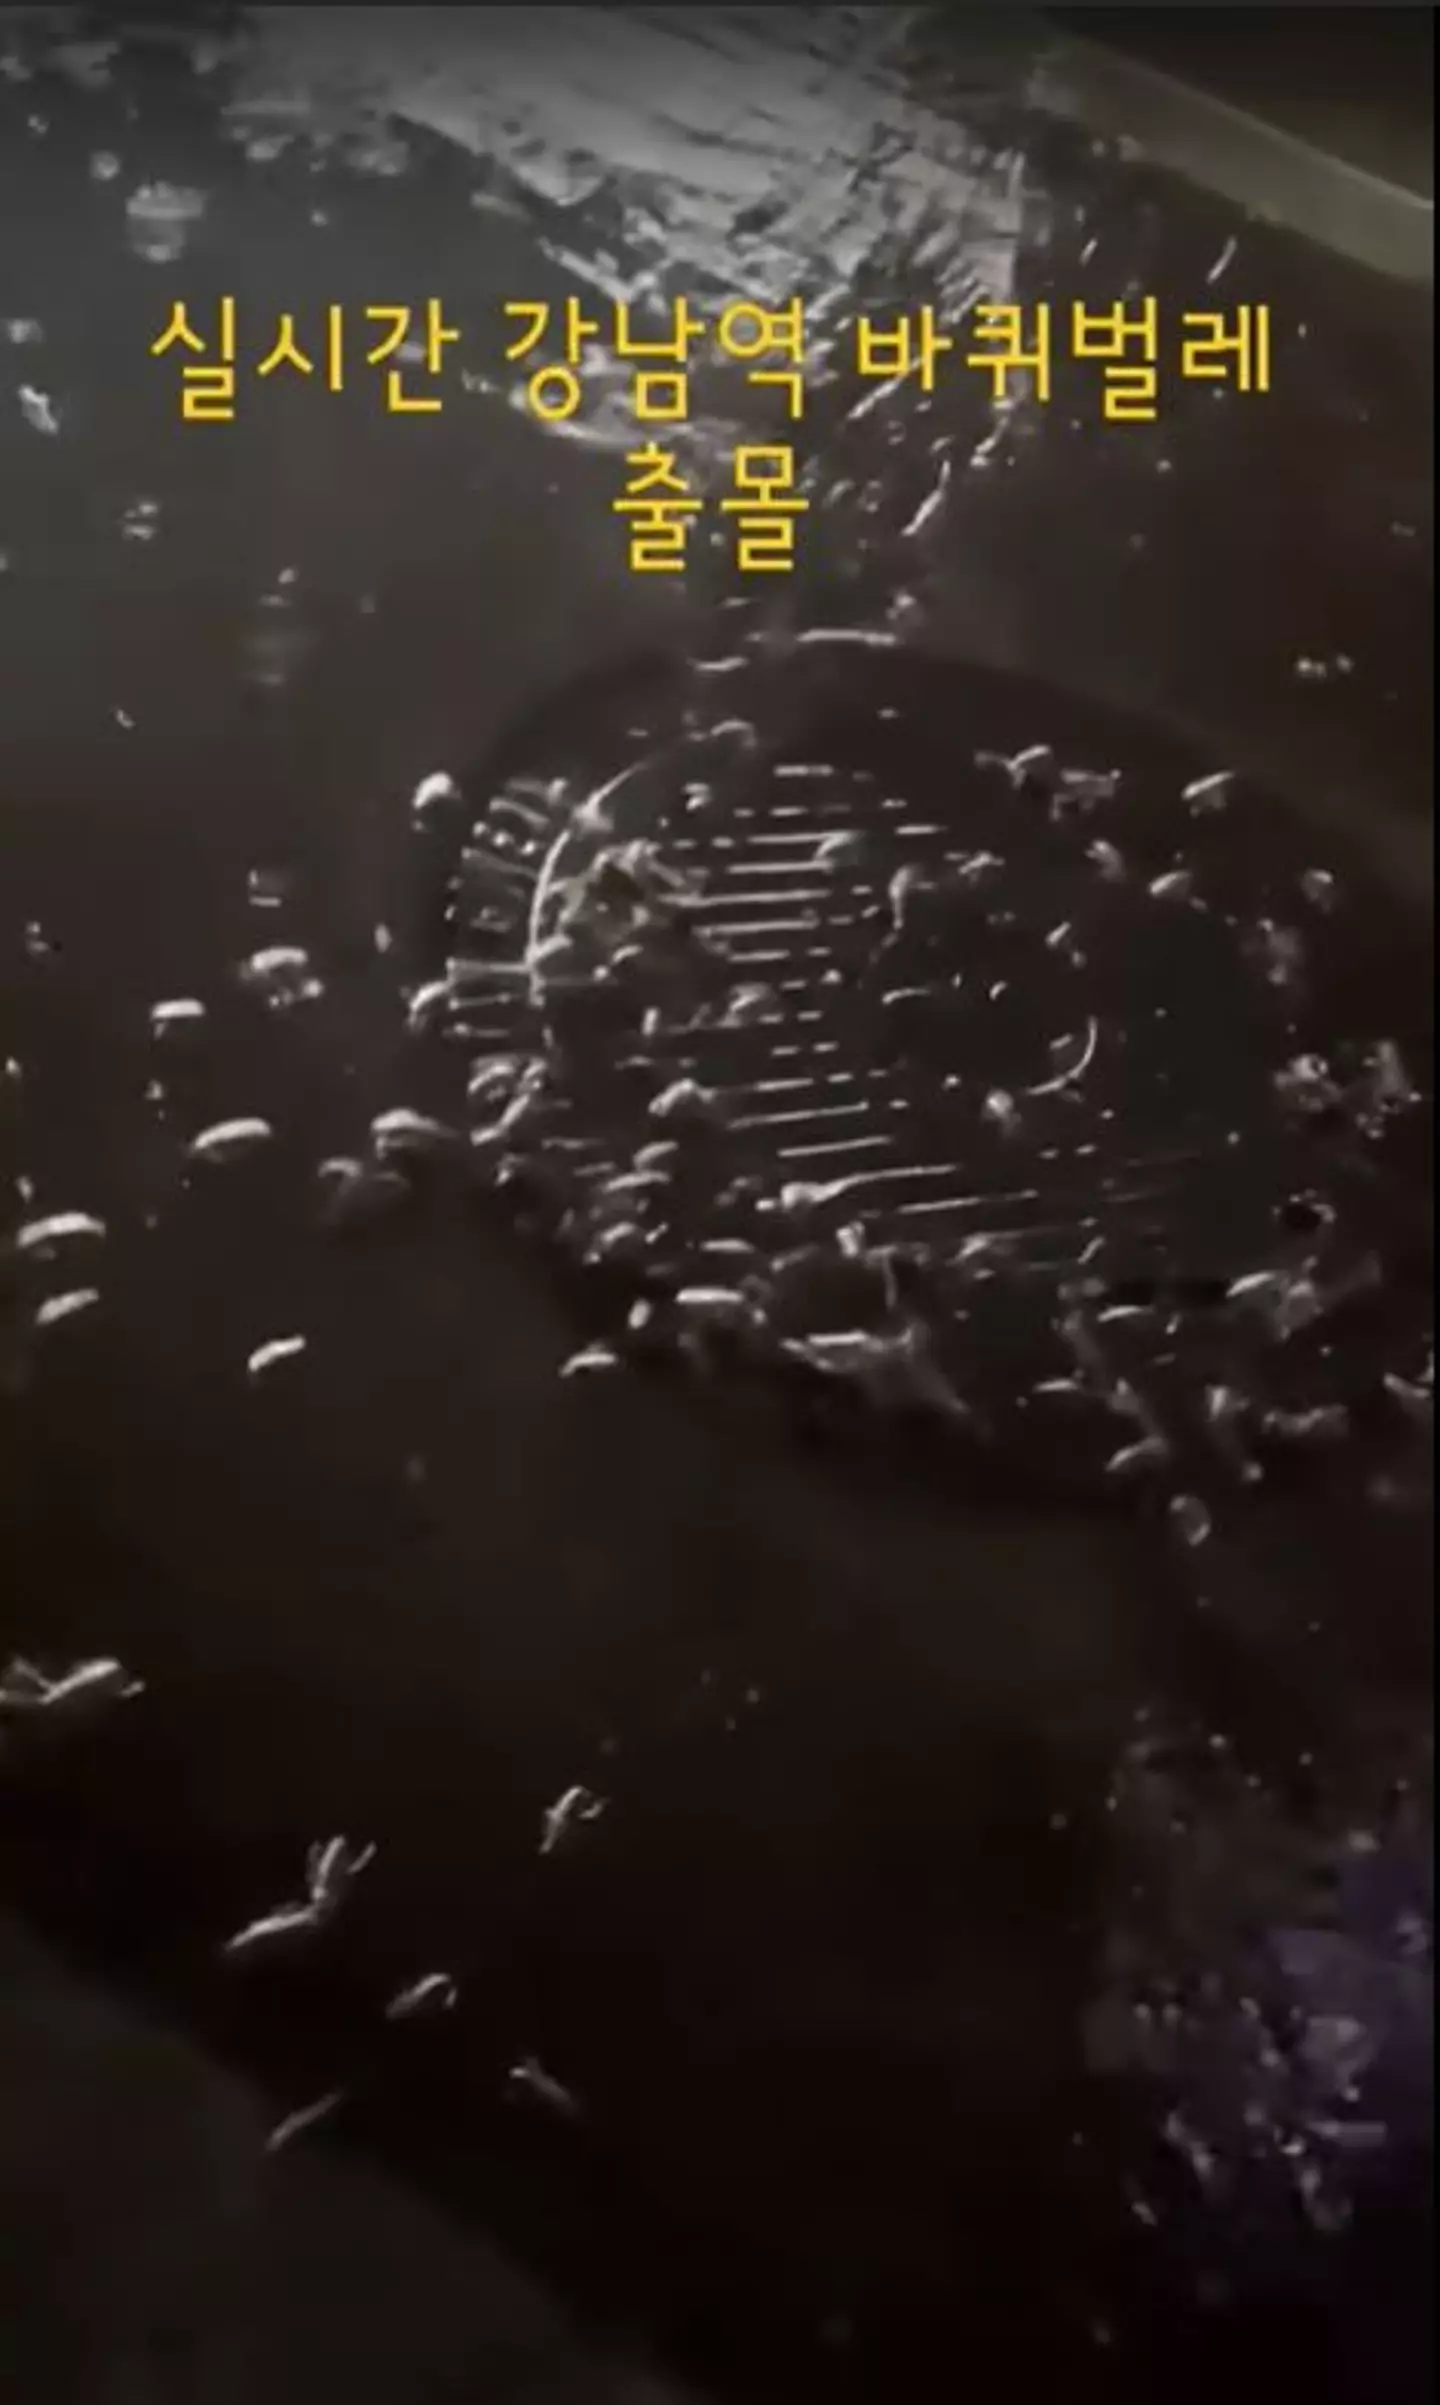 Cockroaches are common in South Korea's capital but the 'tidal wave' is a new phenomenon.